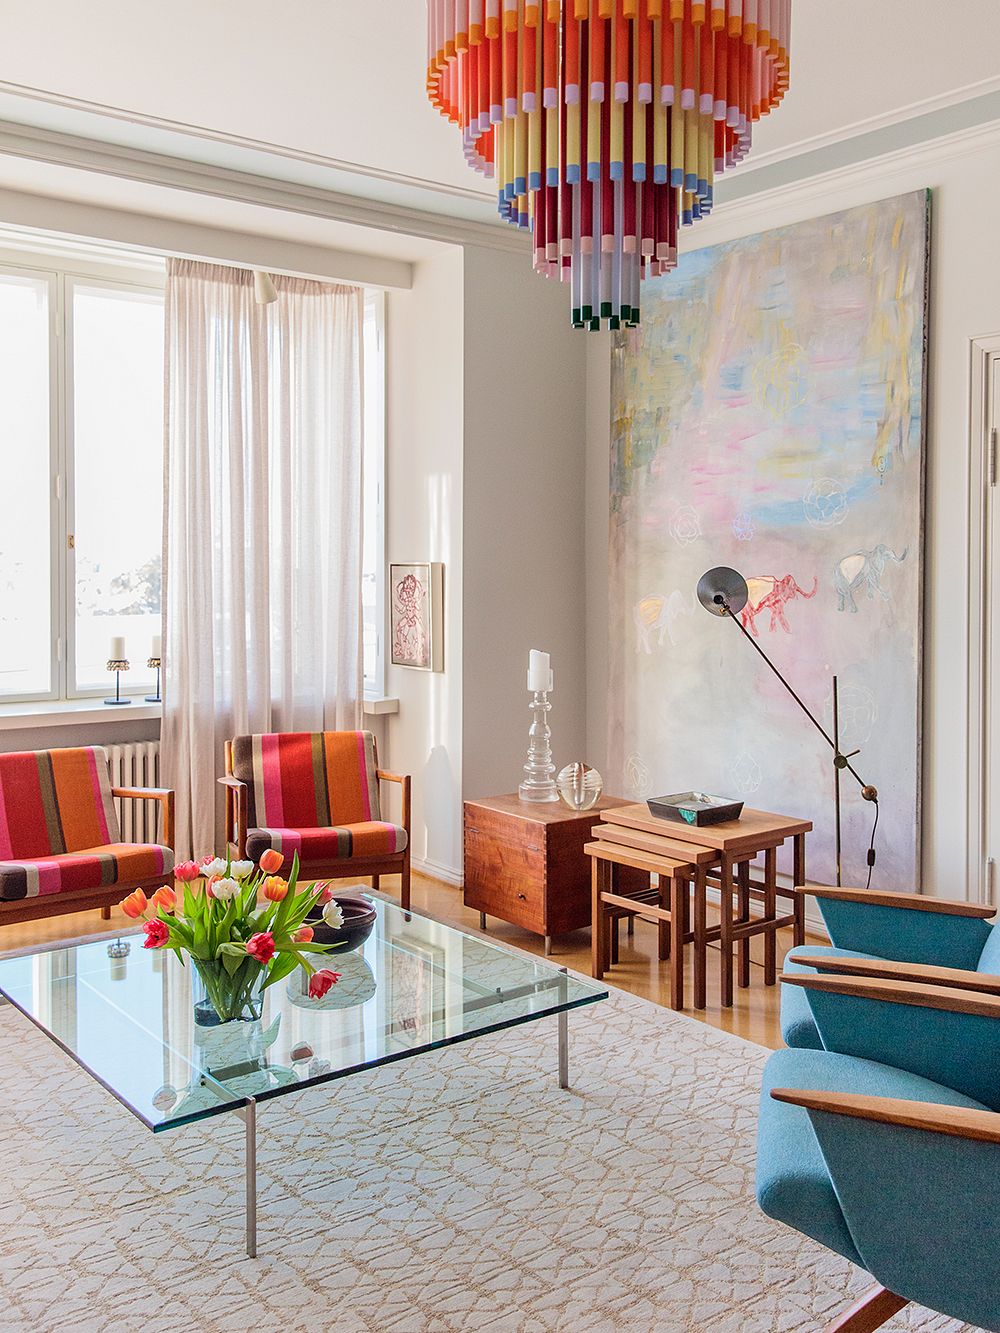 An image of a living room: a glass coffee table, a colorful ceiling lamp, colorful vintage lounge chairs and a large painting on the wall.